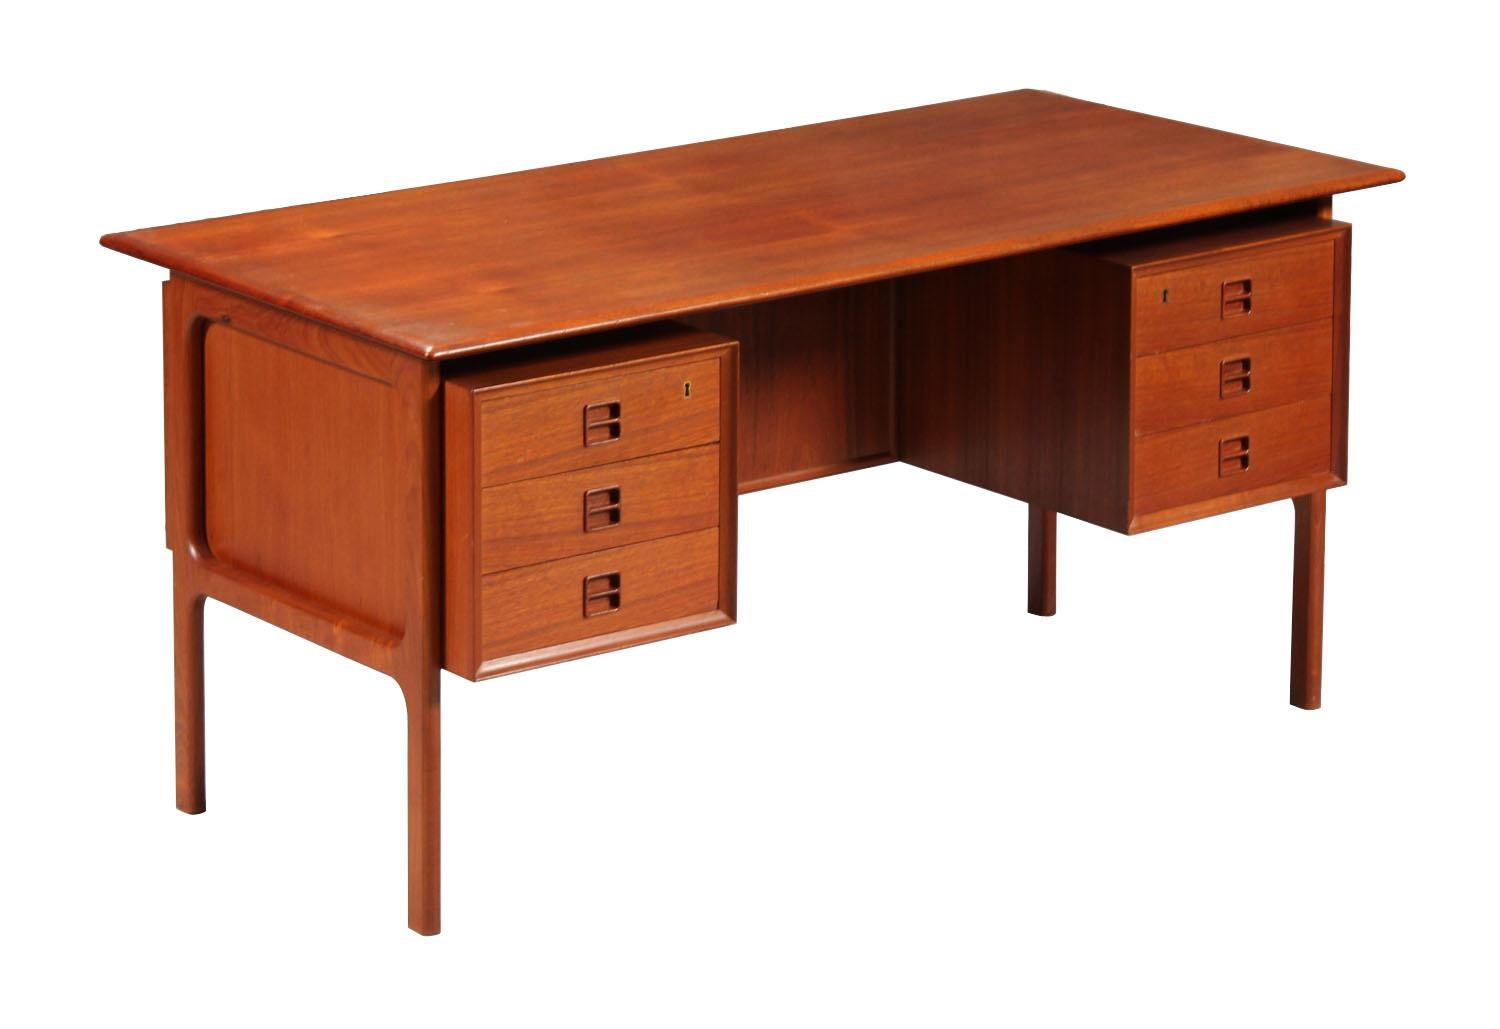 Freestanding writing desk designed by Arne Vodder

Nice rich colour teak veneer with solid teak legs' construction and profiles running along the edges. 

Front of the desk features six drawers two of which are lockable (key is included). Rear